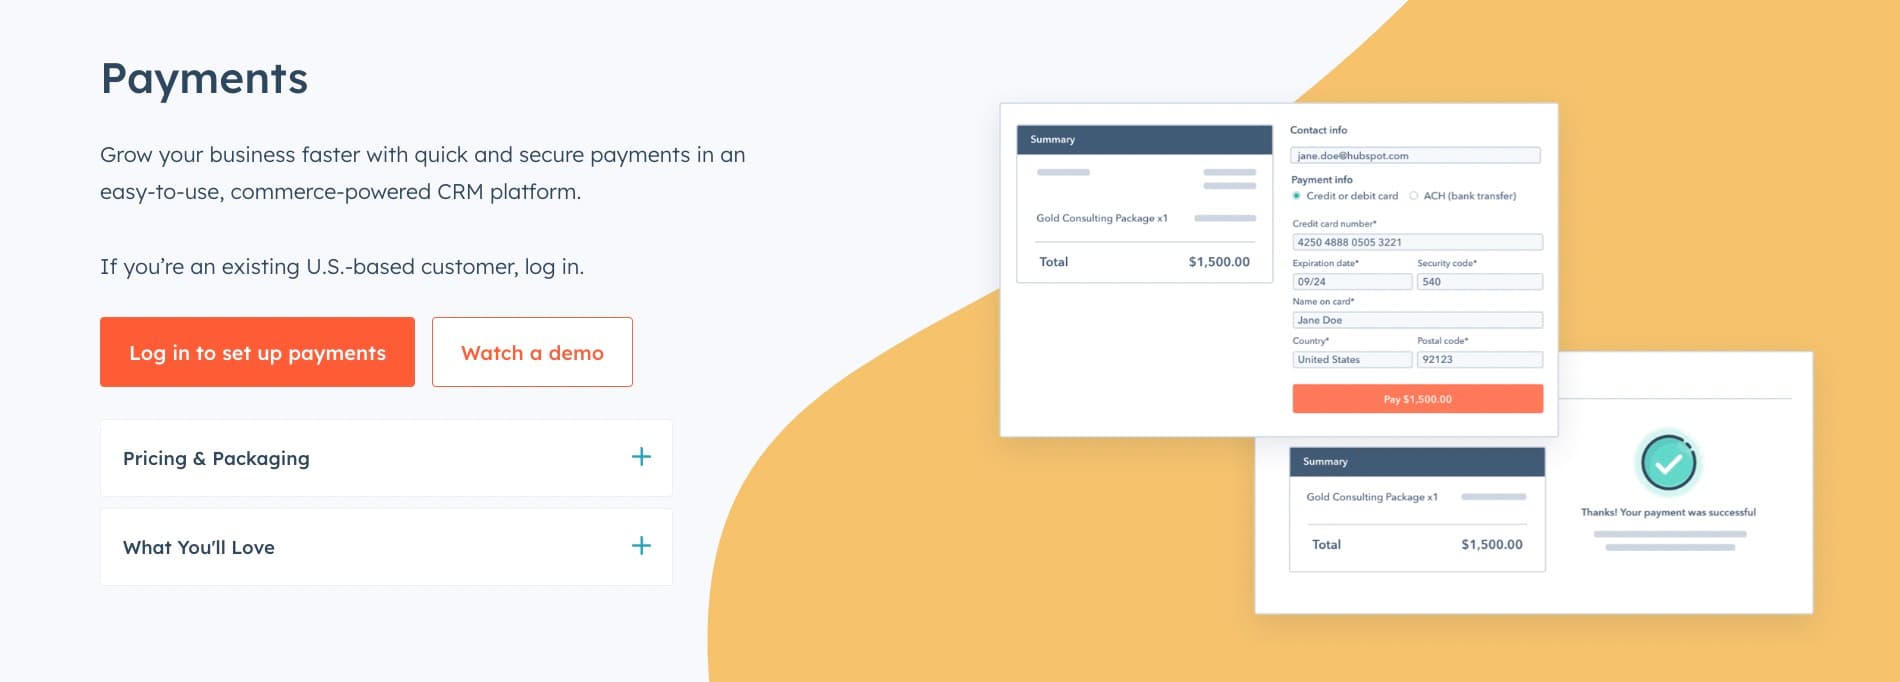 HubSpot Payments tool; credit card processors for small business